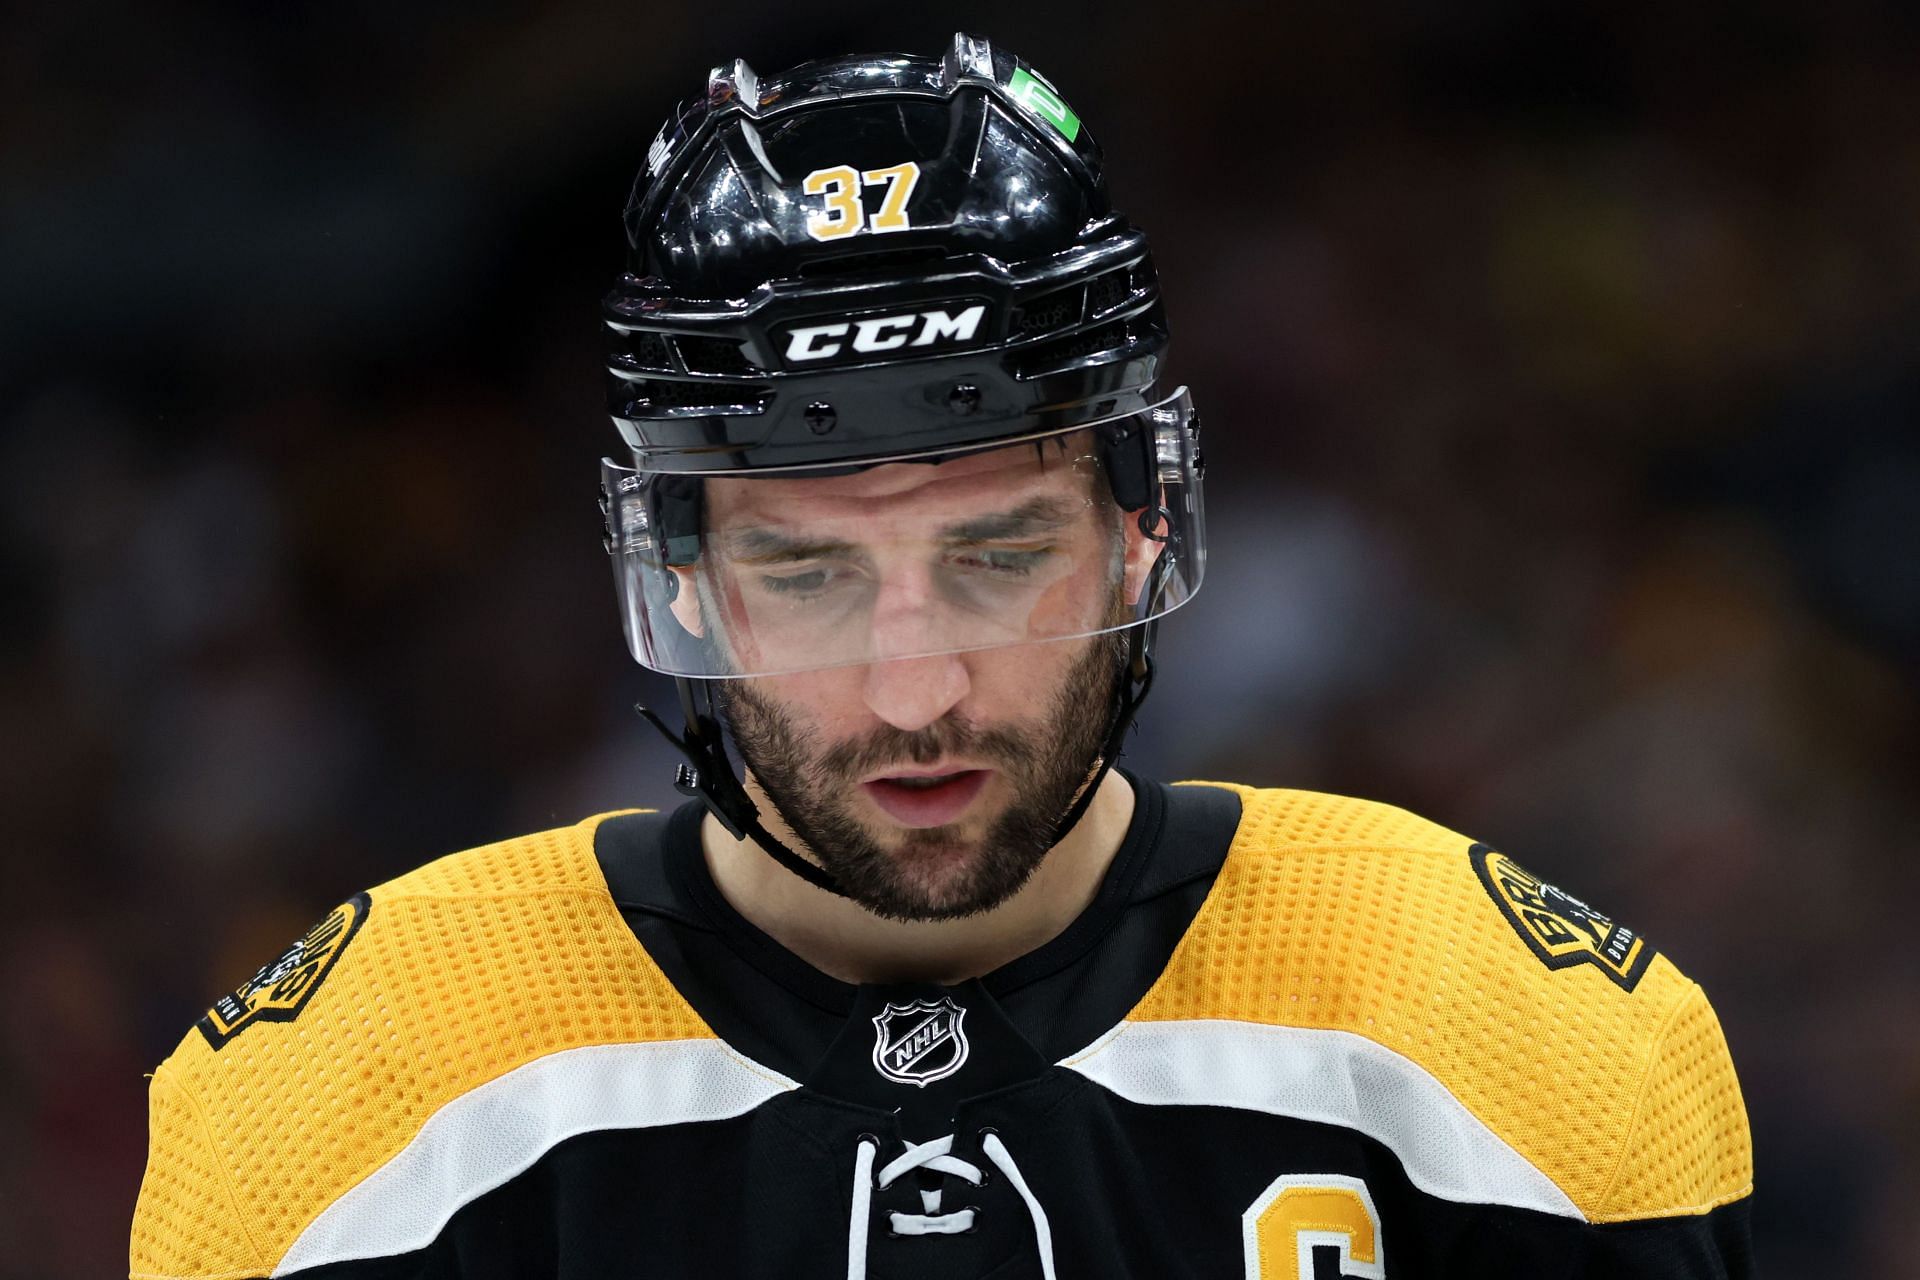 Will Patrice Bergeron Retire After the Boston Bruins' Upset by the